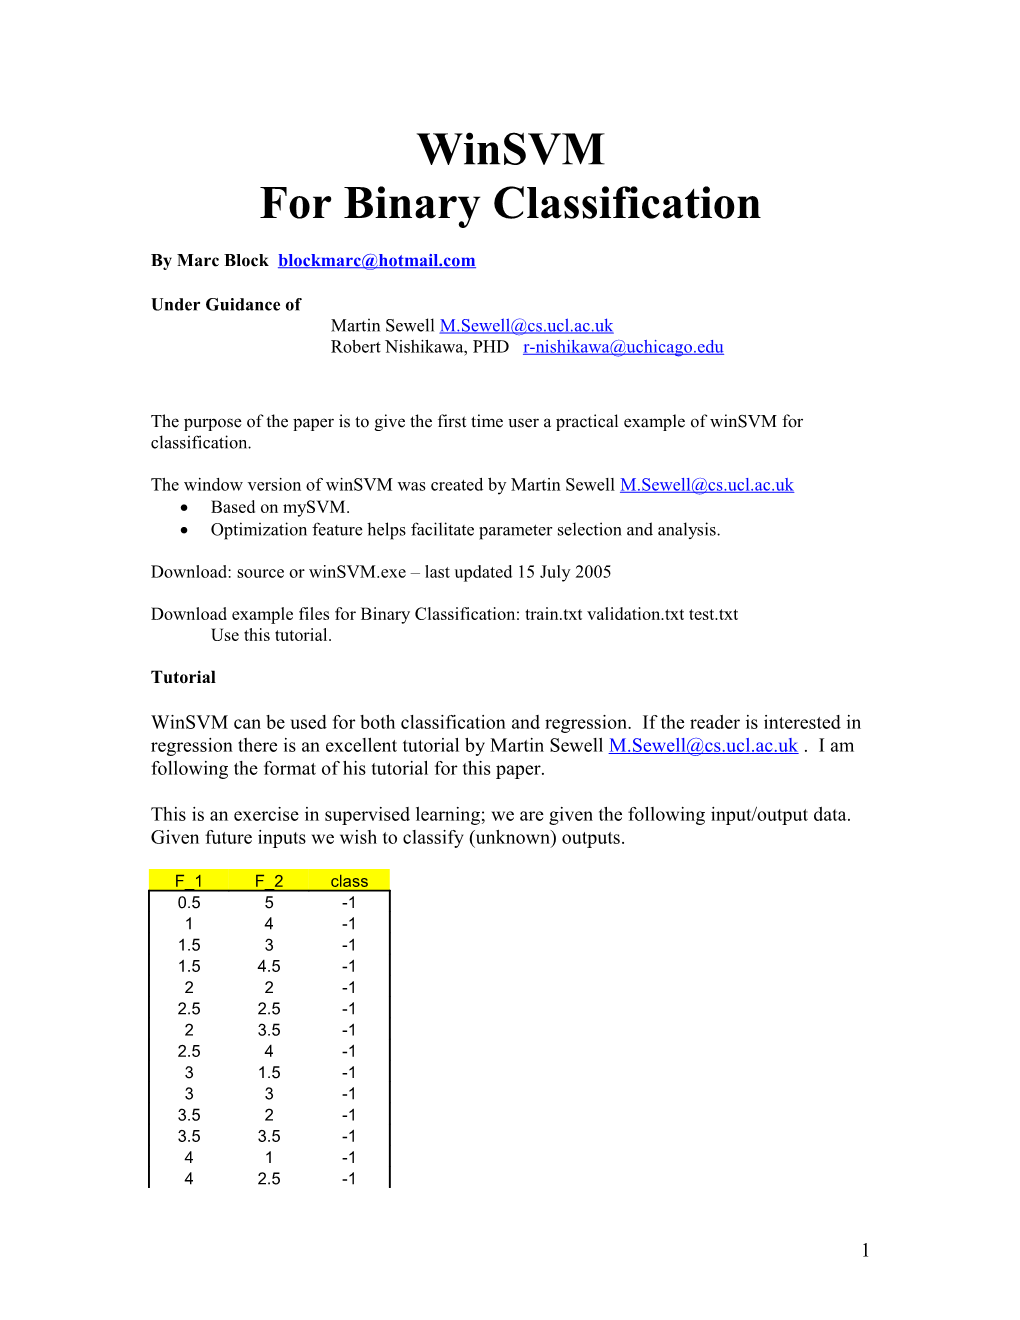 For Binary Classification